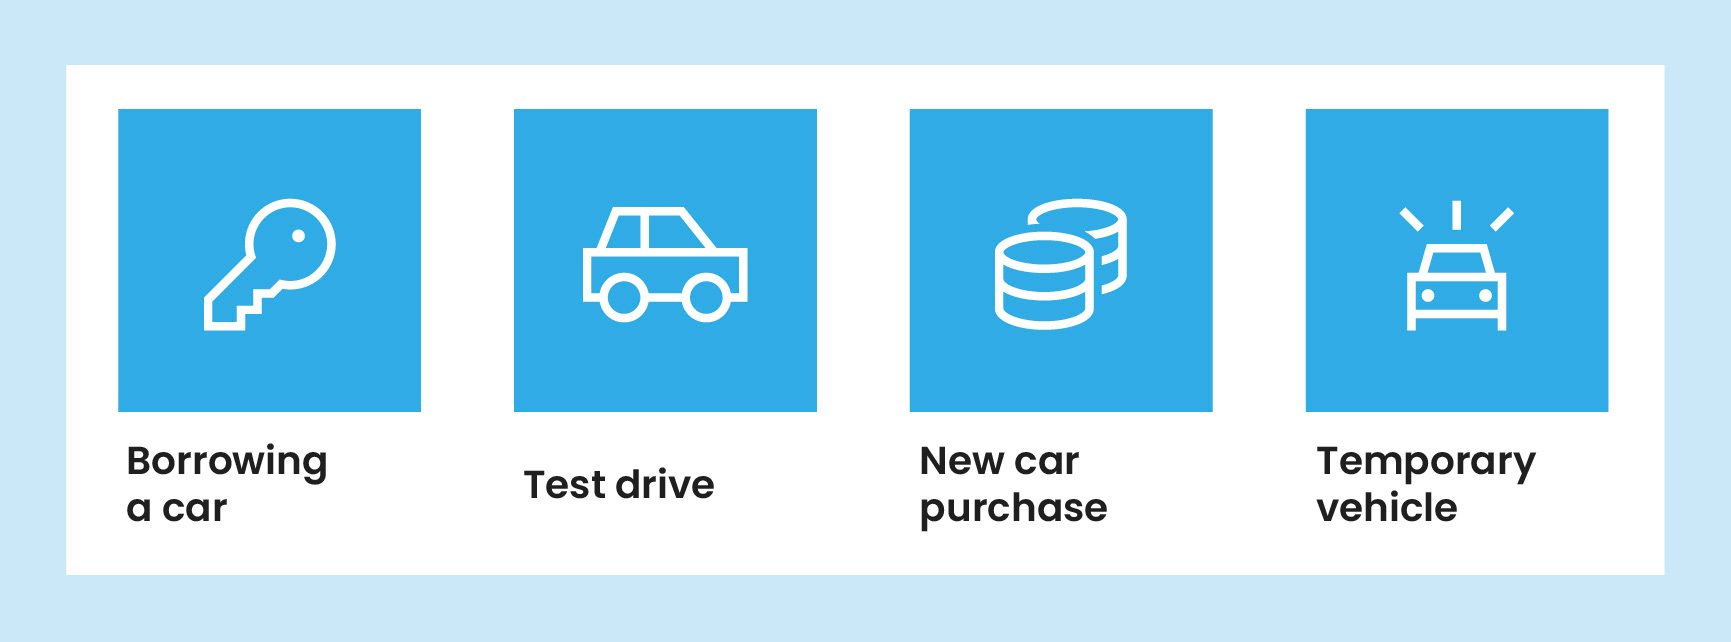 Blue icons of a key, side-facing car, coins and front-facing car, above black text, saying “Borrowing a car”, “Test drive”, “New car purchase”, and “Temporary vehicle”